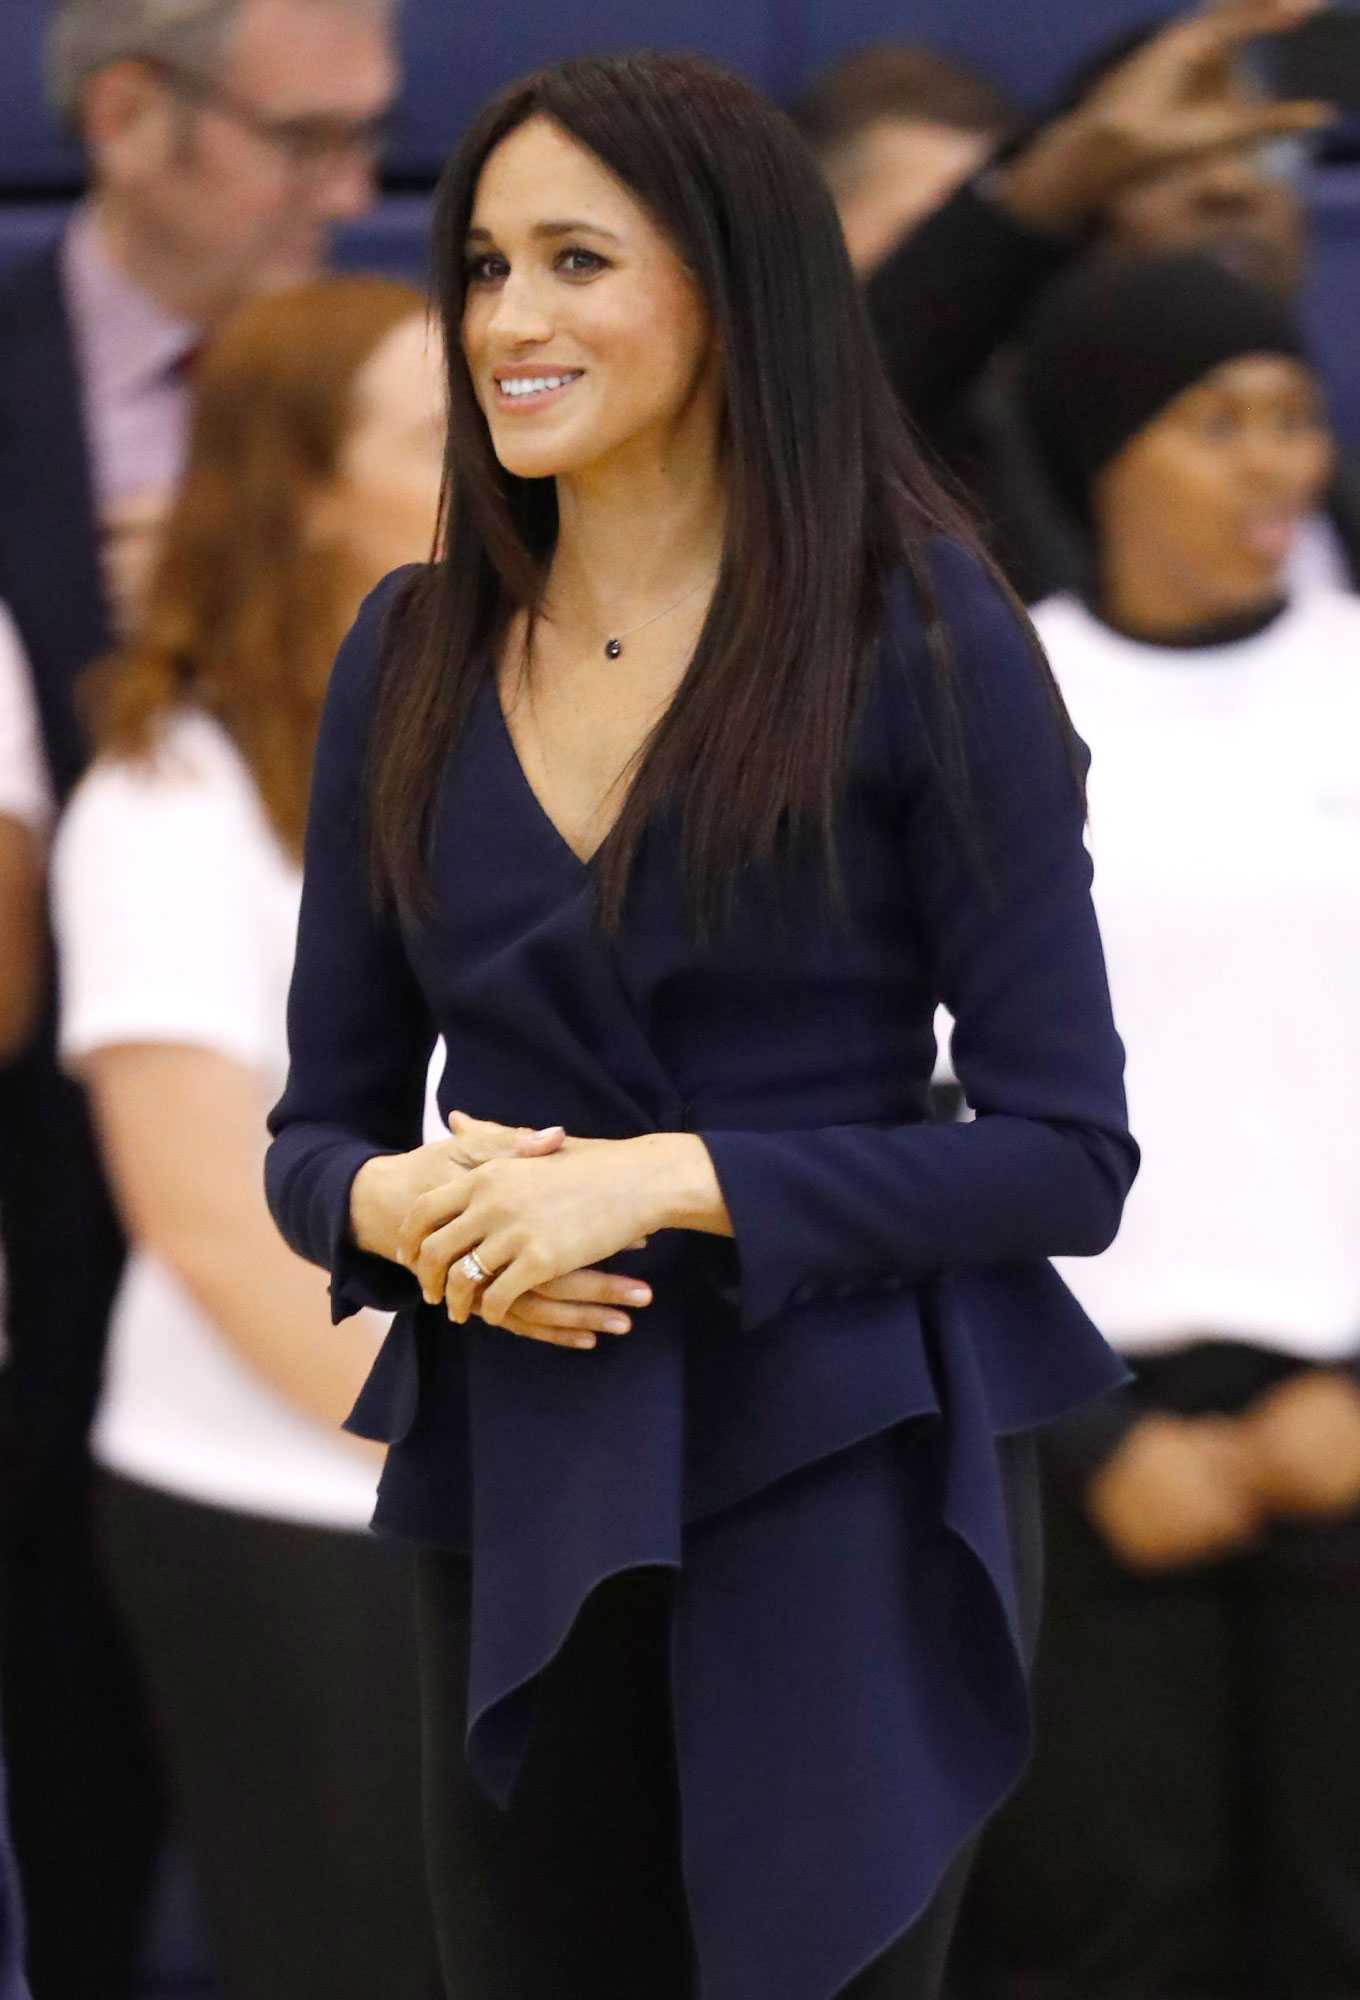 70+ Hot Pictures Of Meghan Markle Which Are Just Too Hot To Handle 231